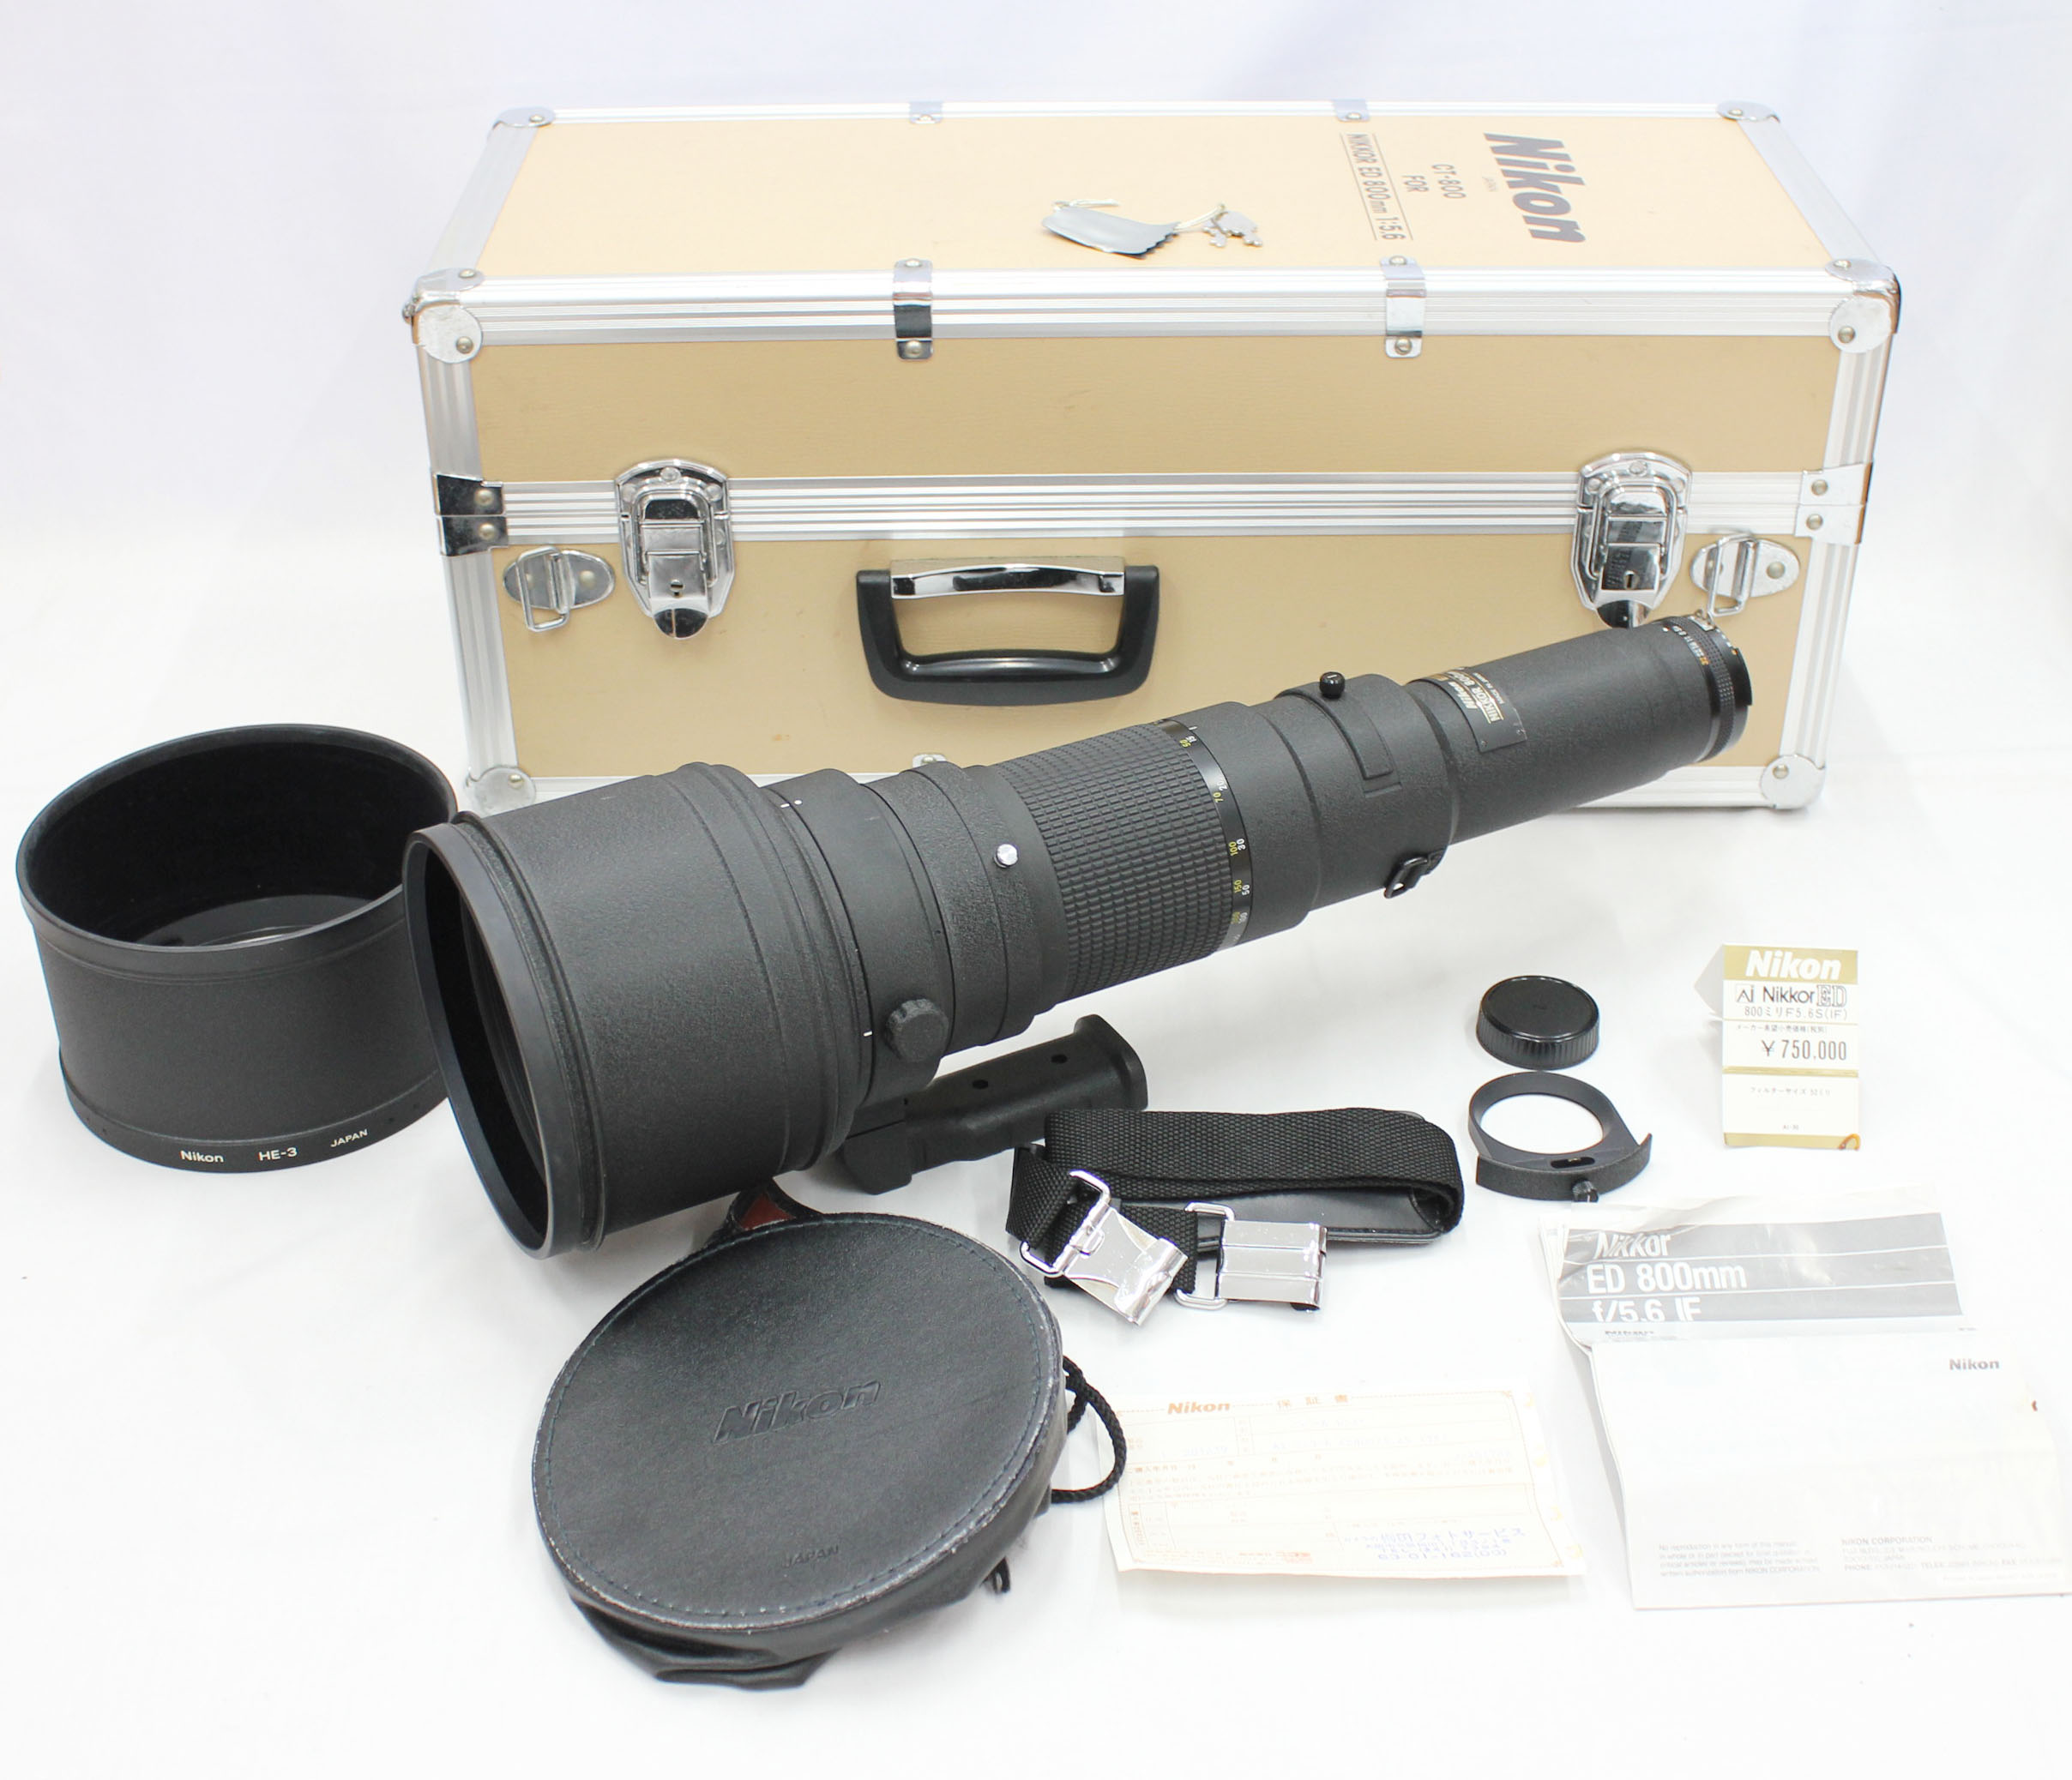 [Near Mint] Nikon Ai-s Ais Nikkor ED 800mm F/5.6 IF Telephoto Lens in Case from Japan